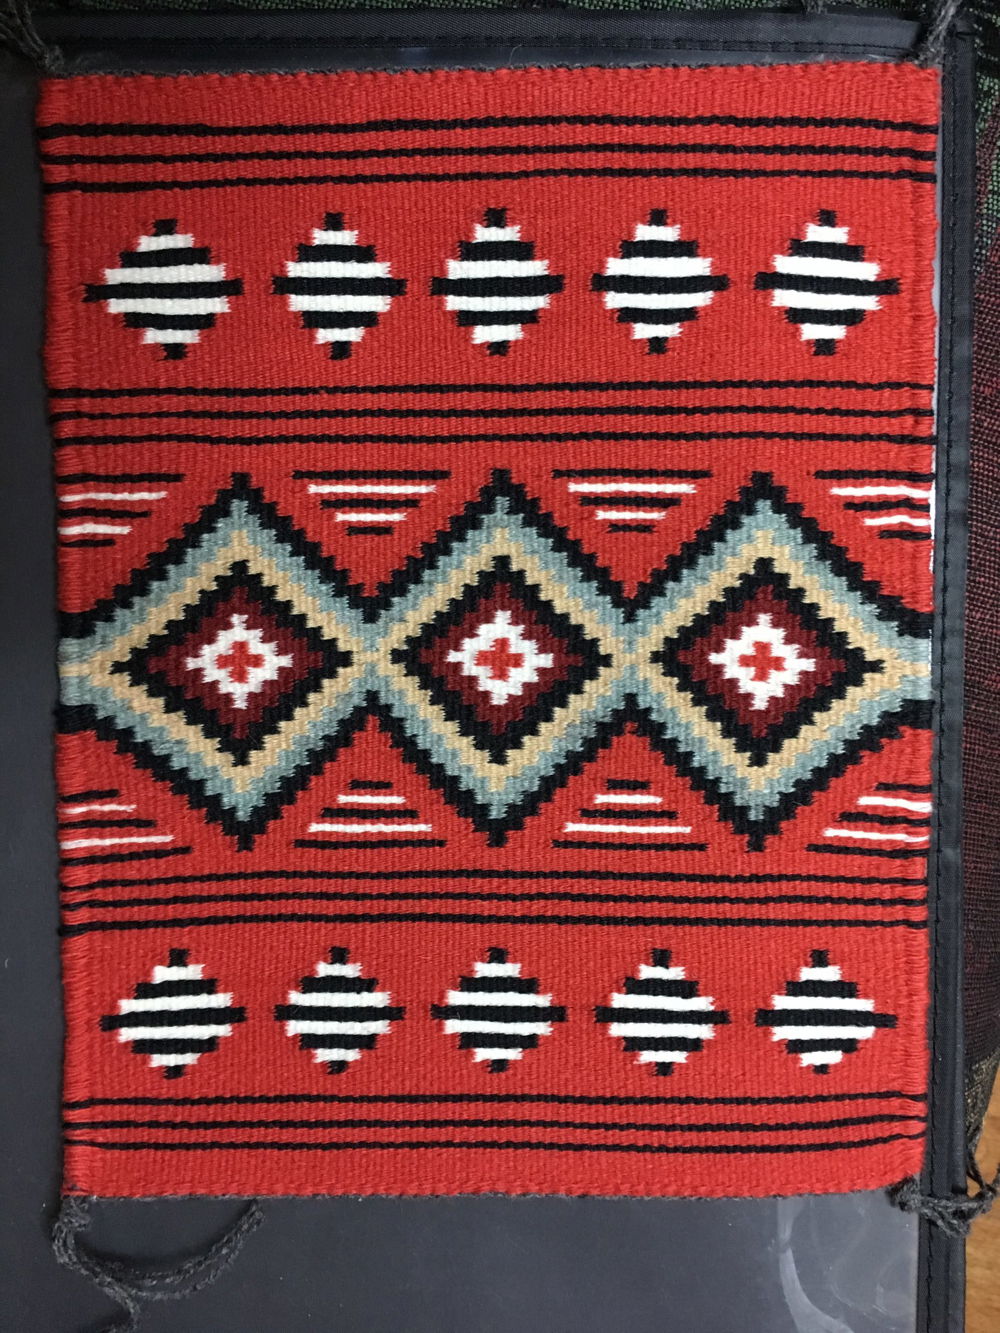 A blanket with a red background and three large diamonds in the center. The diamonds contain borders of teal, cream, and maroon lines radiating out from a red cross at the center of each shape. Smaller rows of smaller black and white diamonds border the top and bottom of the blanket.